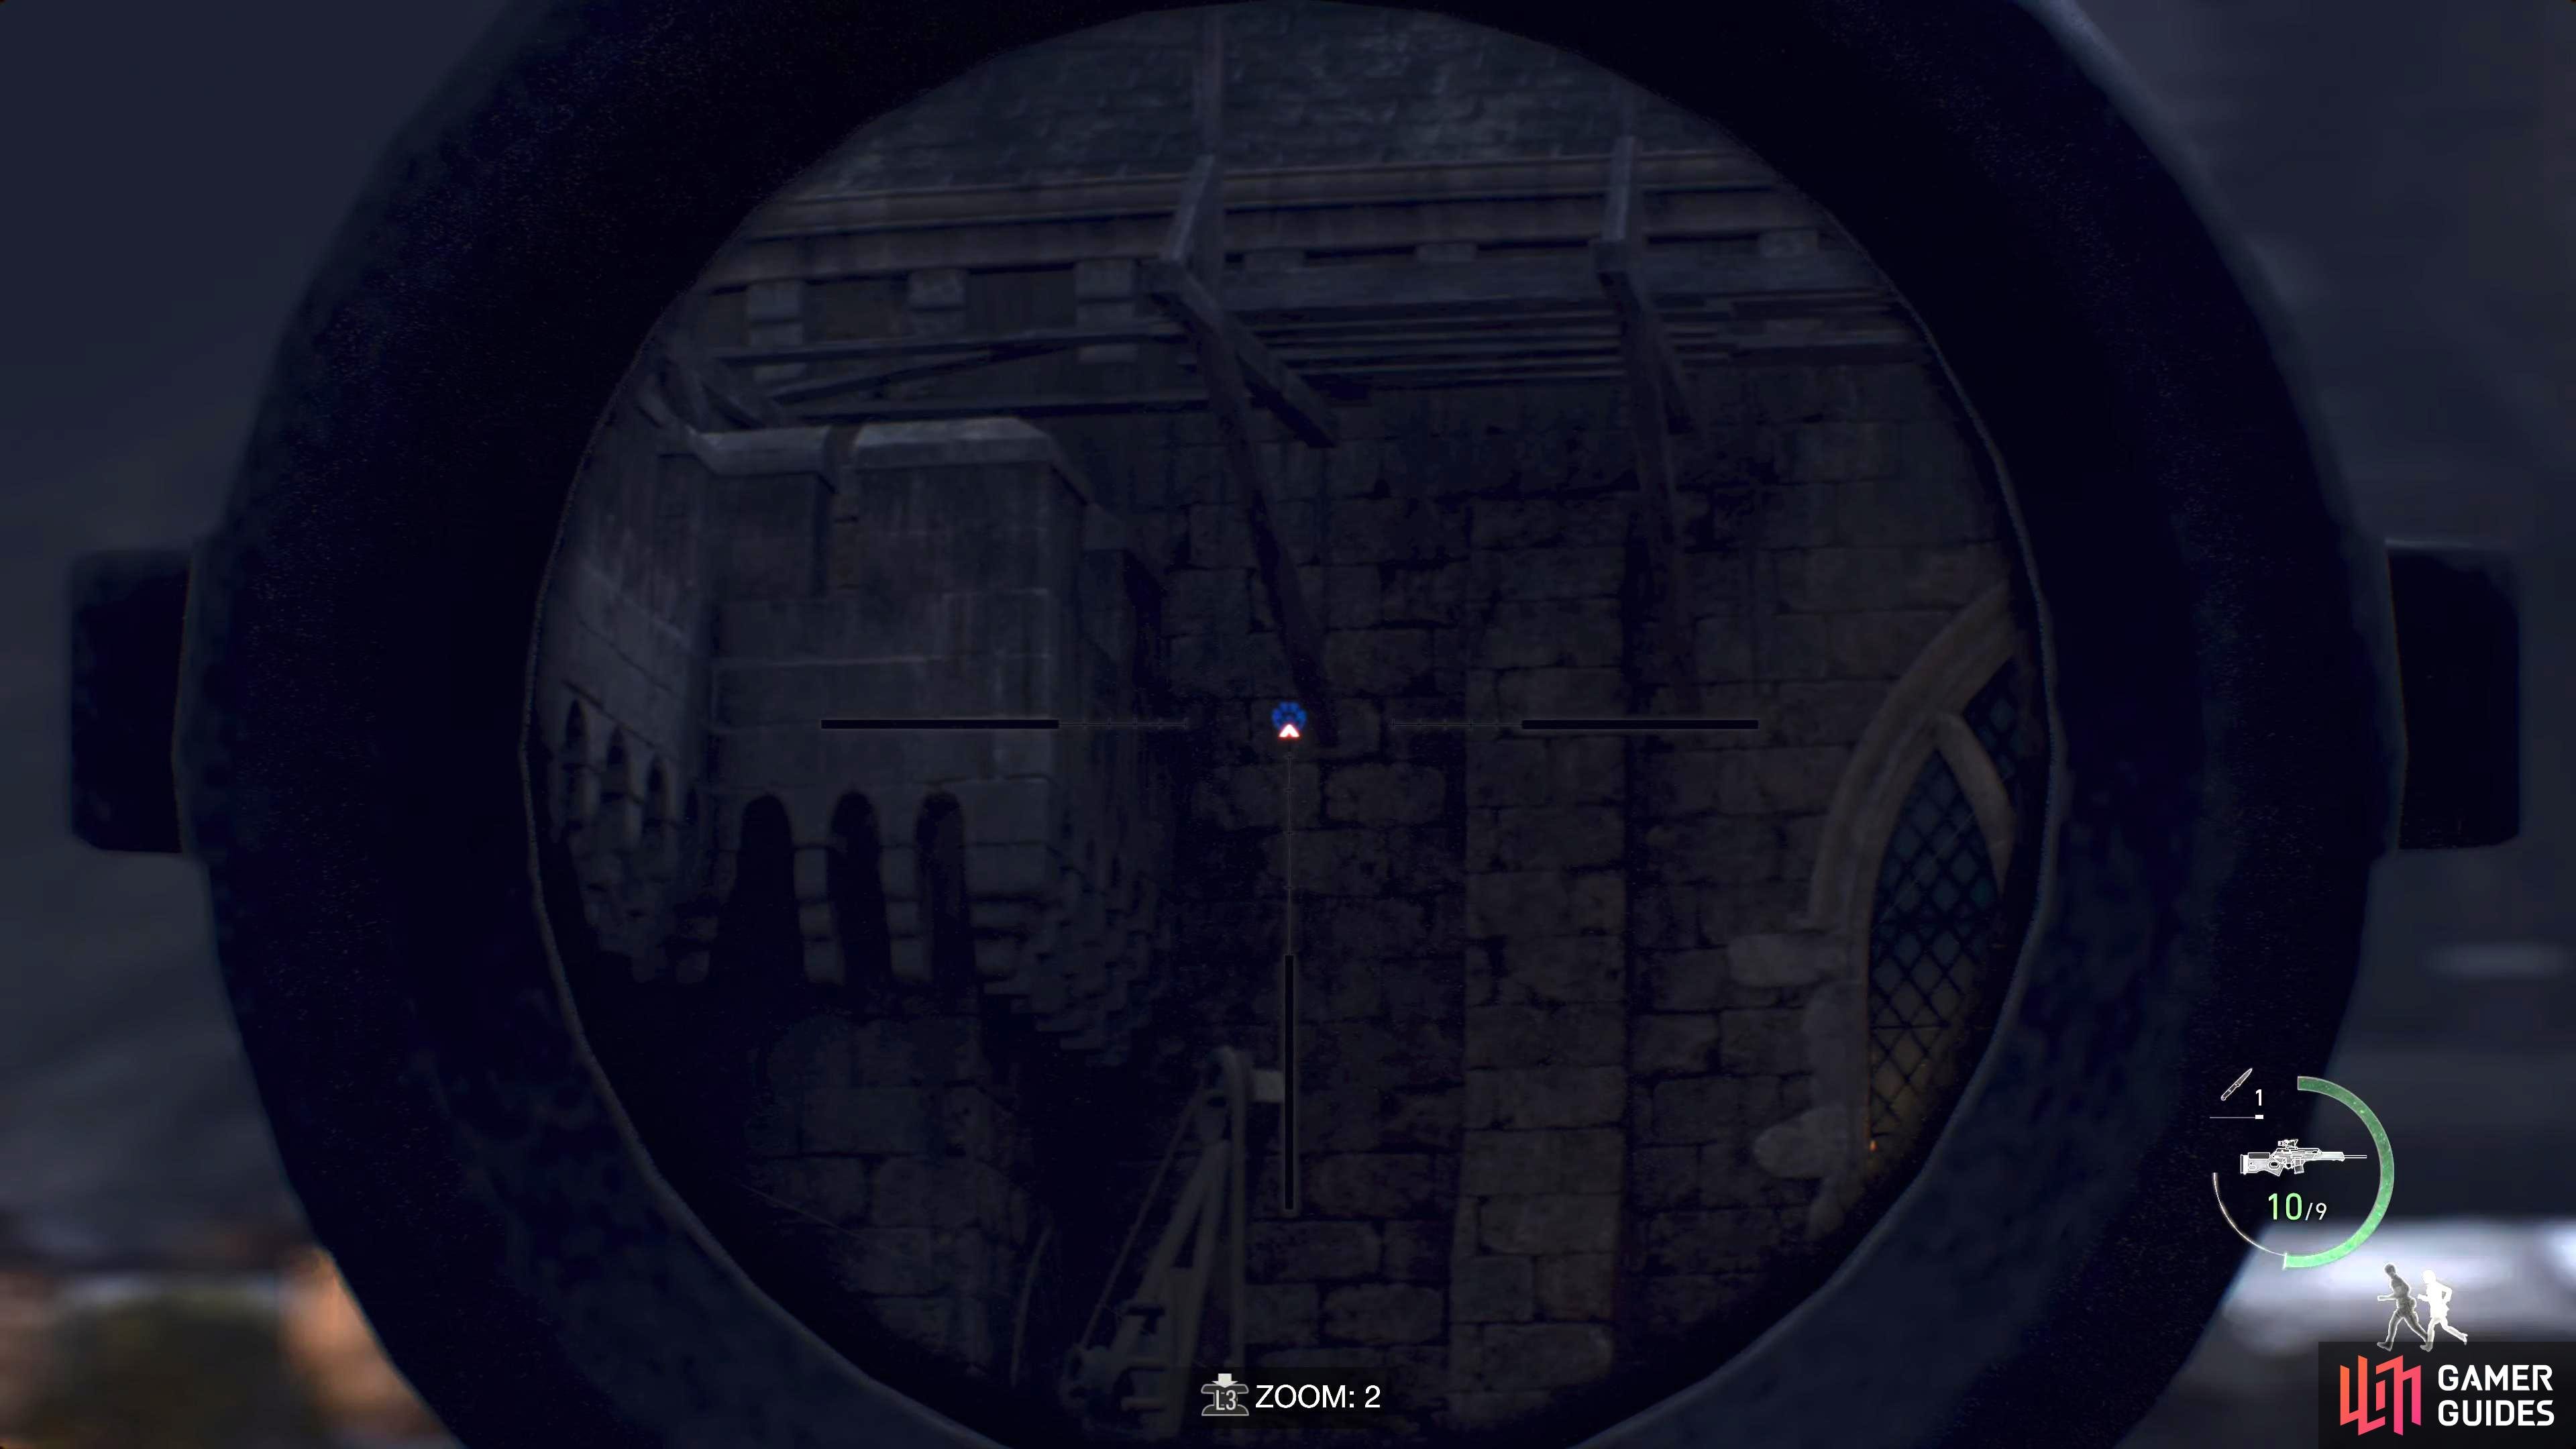 Blue Medallion 2 can be found on the far wall opposite the cannon.